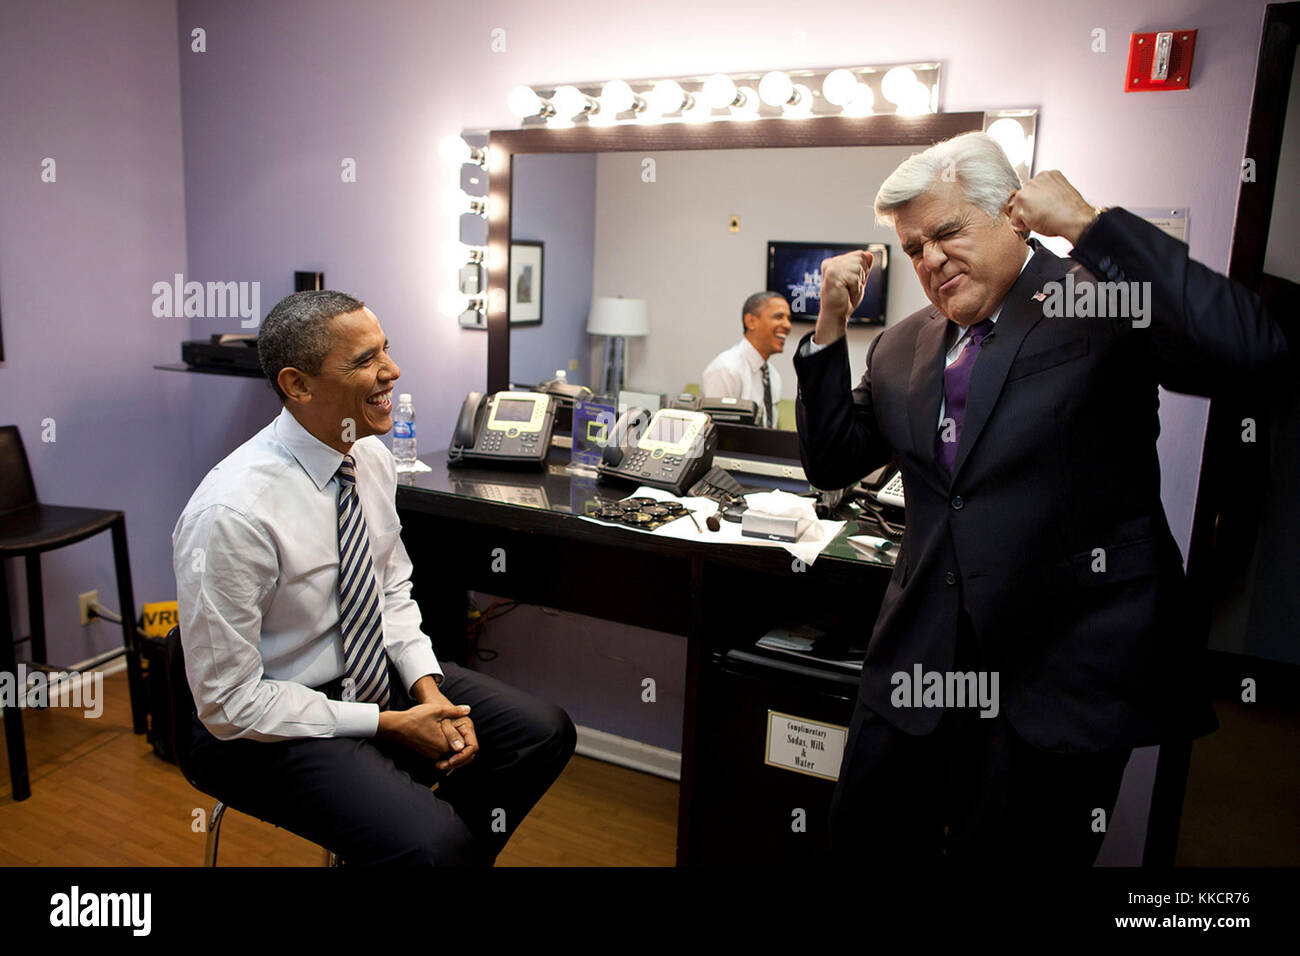 Oct. 25, 2011 'Even backstage, Jay Leno is a hoot. Here he tells the punch line to a funny story as the President waits to tape the Tonight Show in Burbank, Calif.' Stock Photo